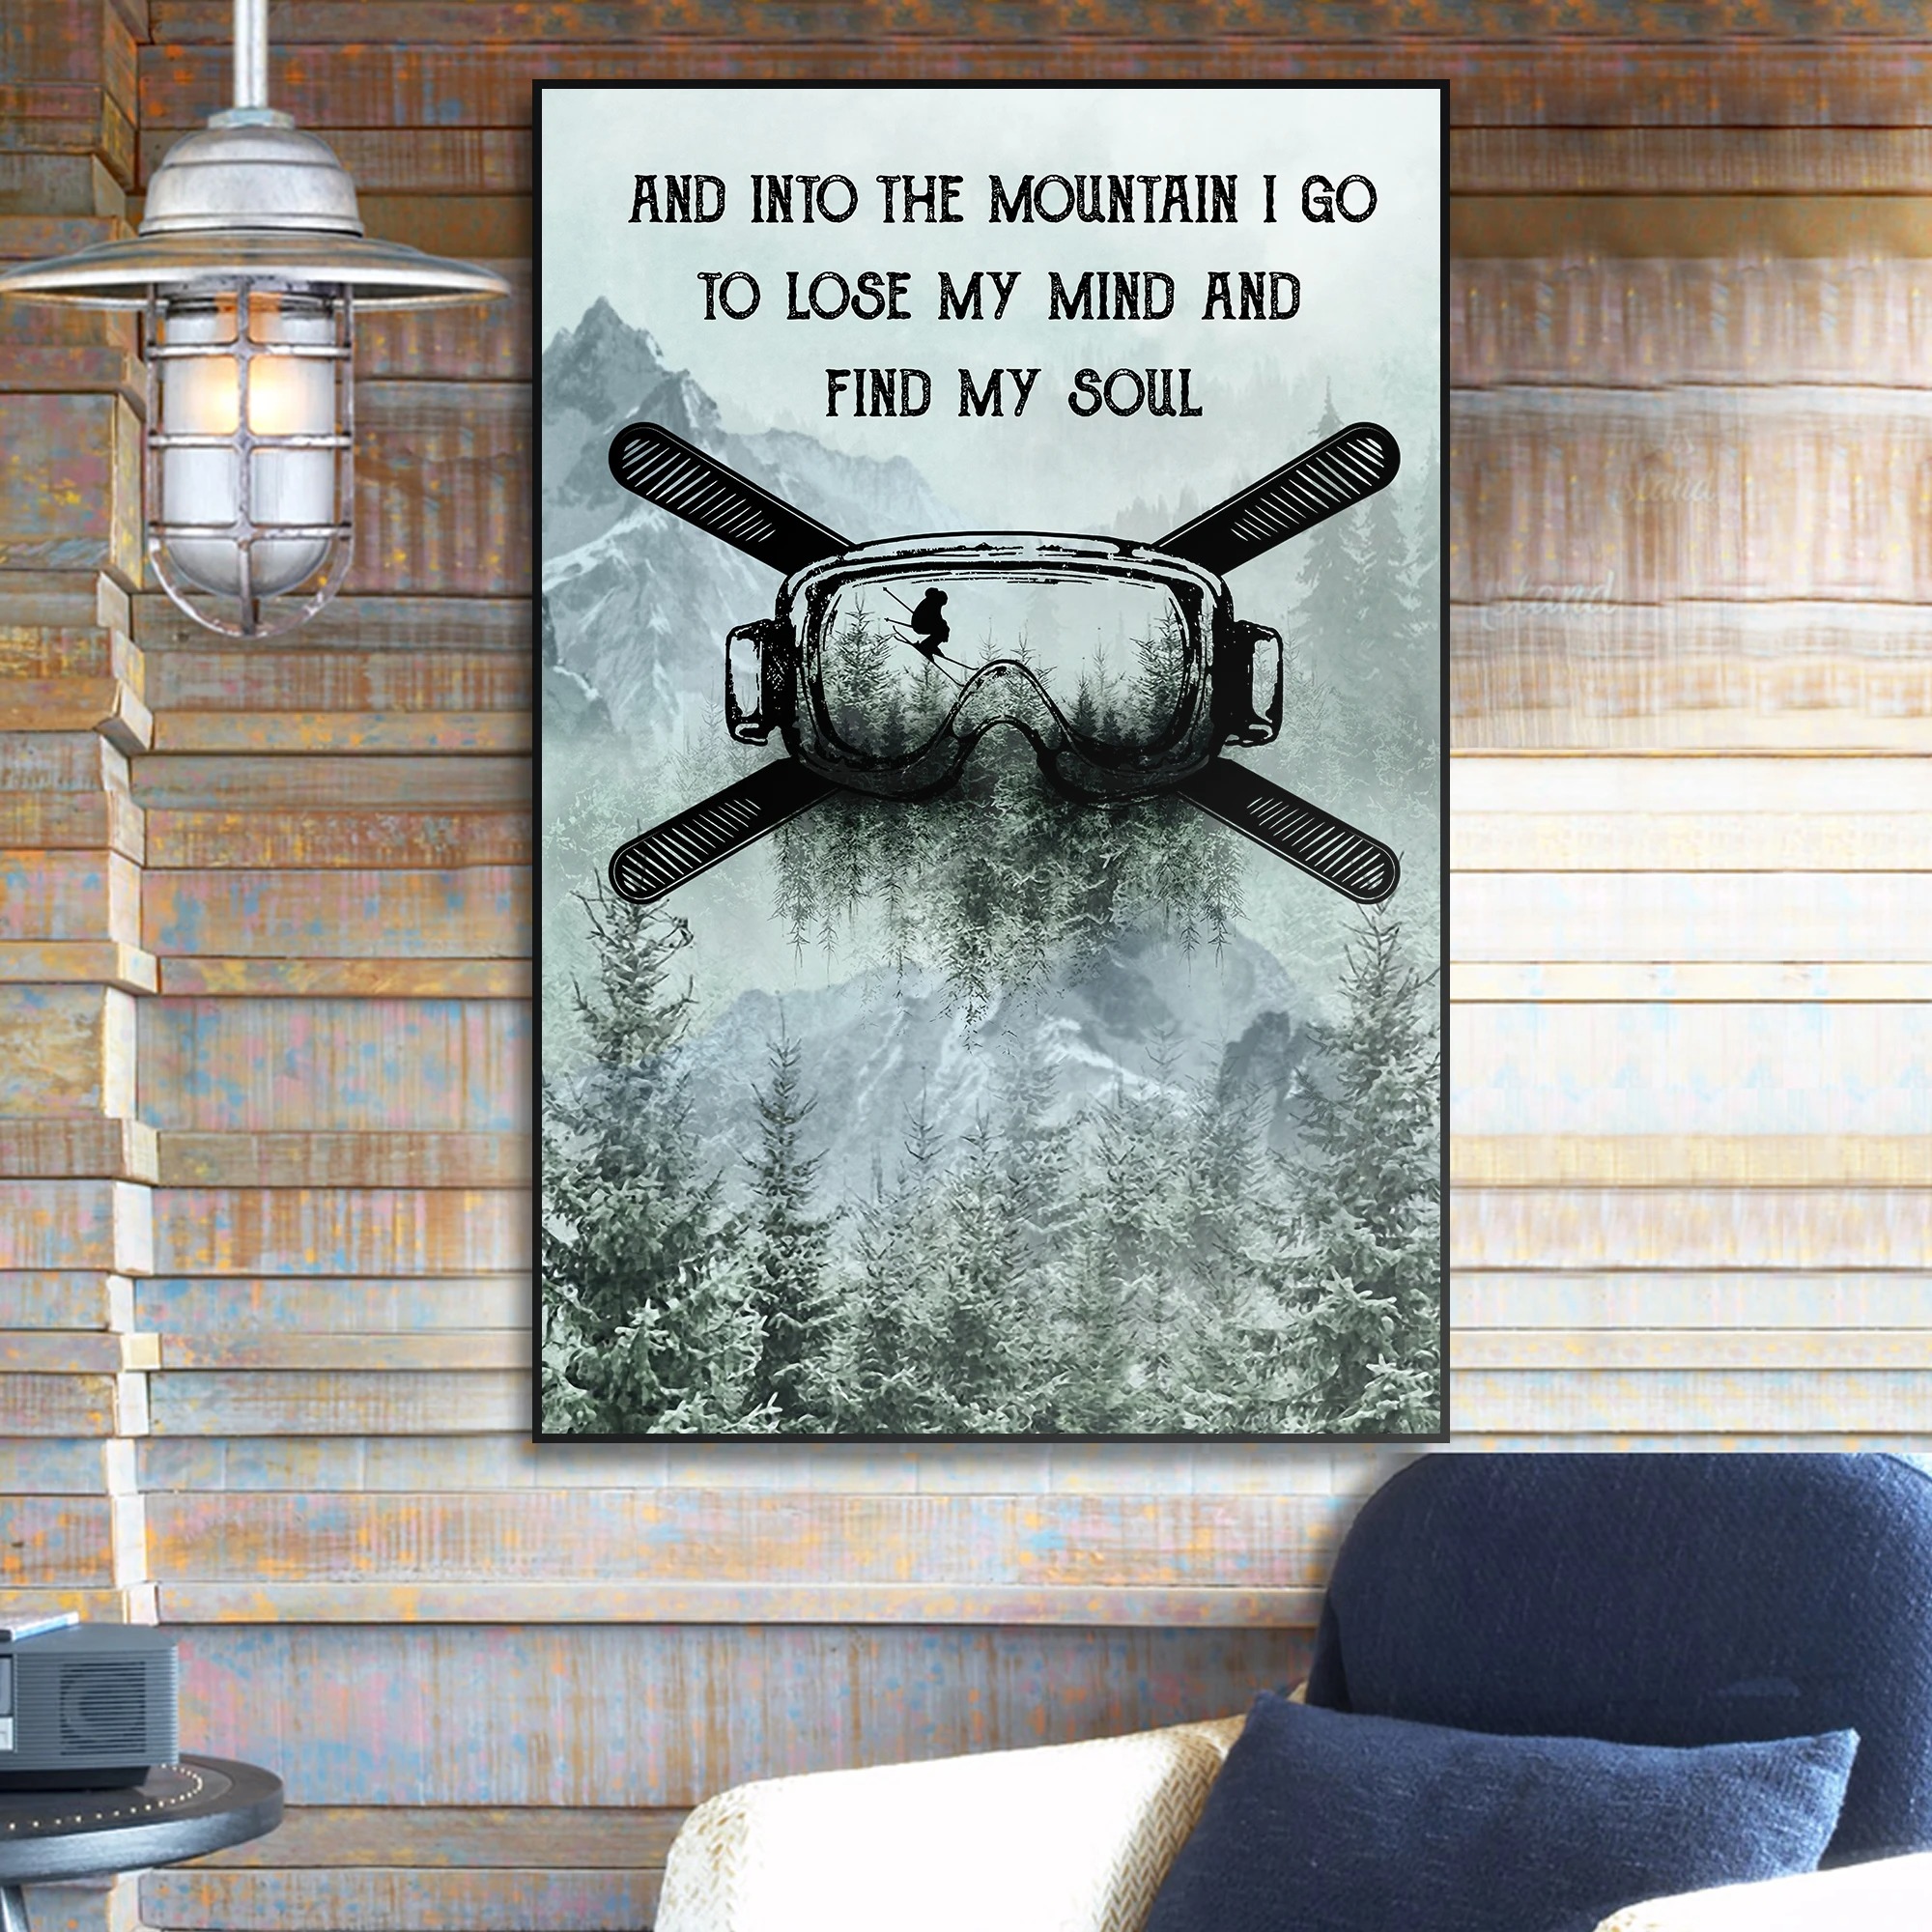 And-Into-The-Mountain-I-Go-To-Lose-My-Mind-And-Find-My-Soul-Poster